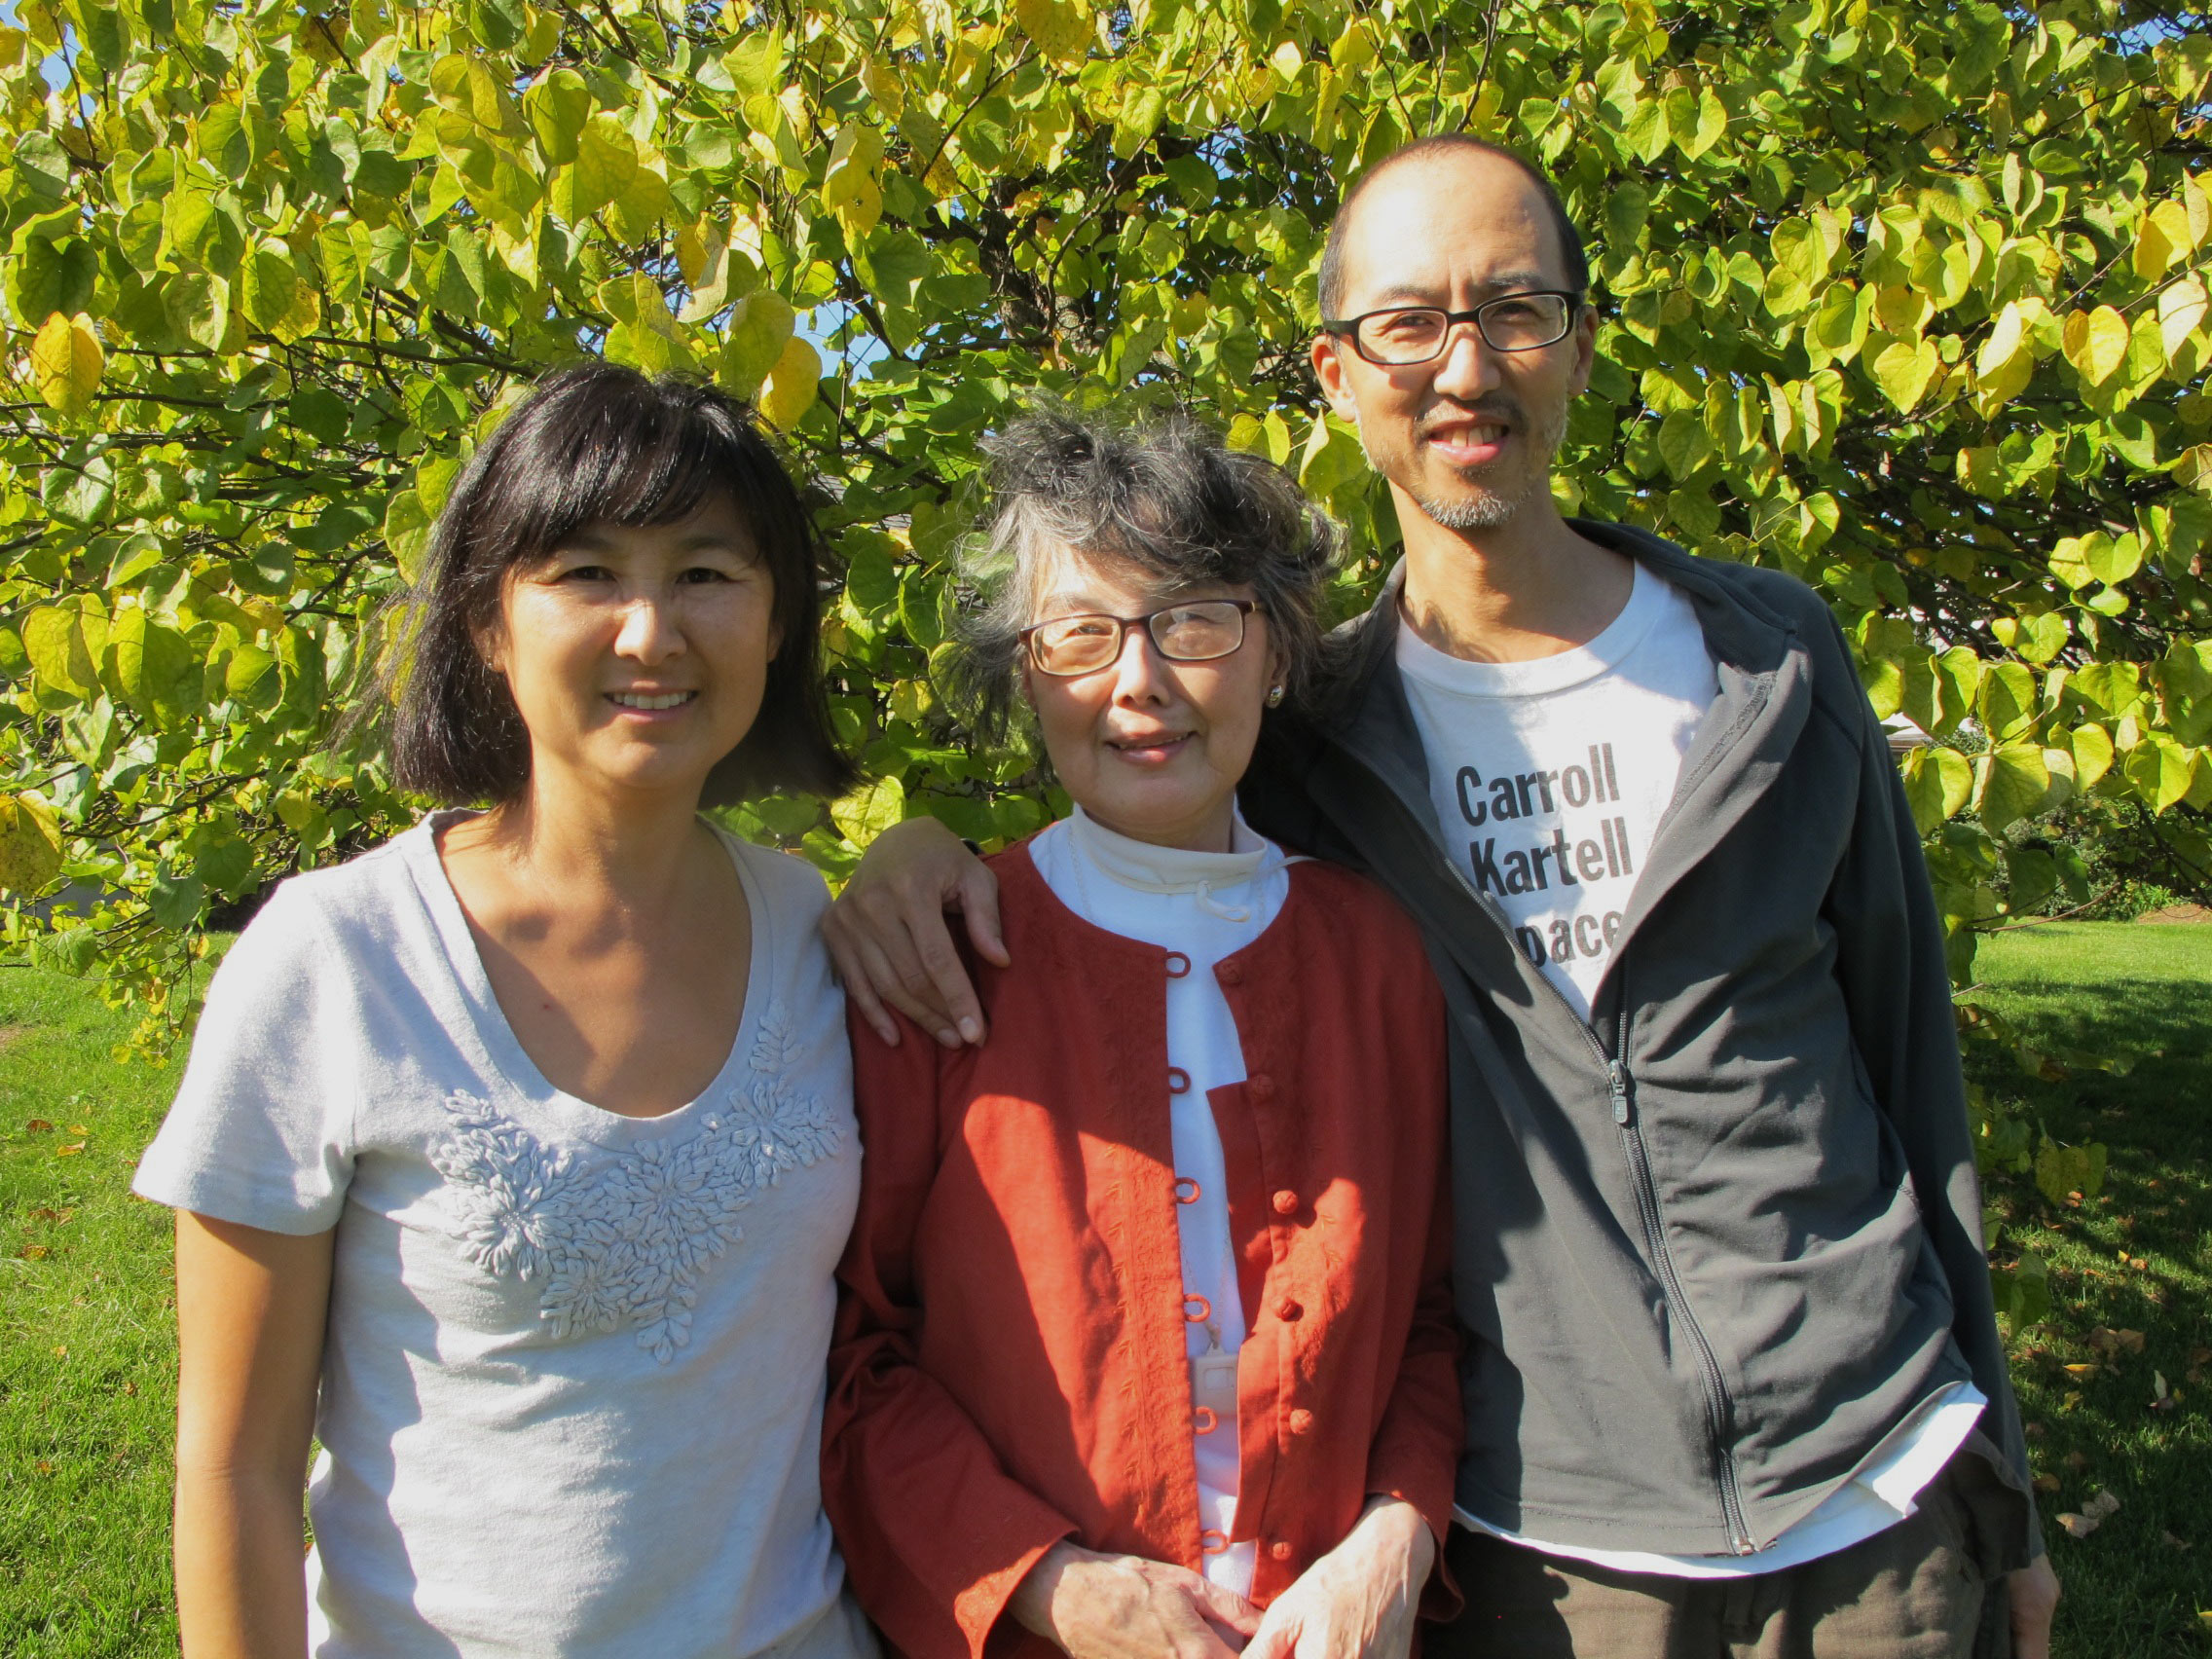 Maya Lin is now an artist and architect who famously designed the Vietnam Veterans Memorial in Washington, D.C., and Tan is a poet and author (pictured here with their mother).